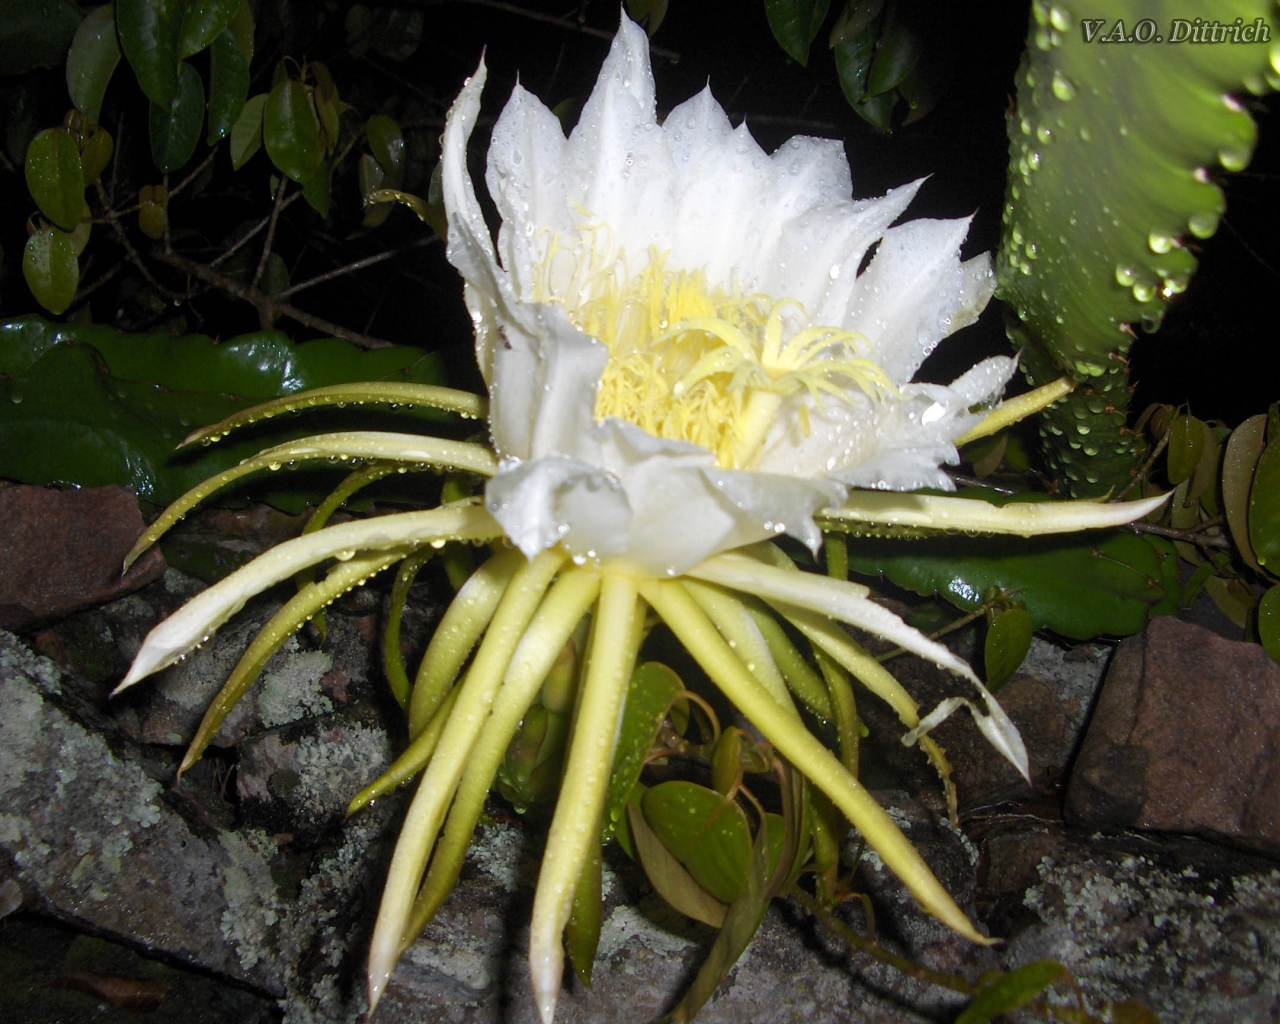 White flower of the cactus